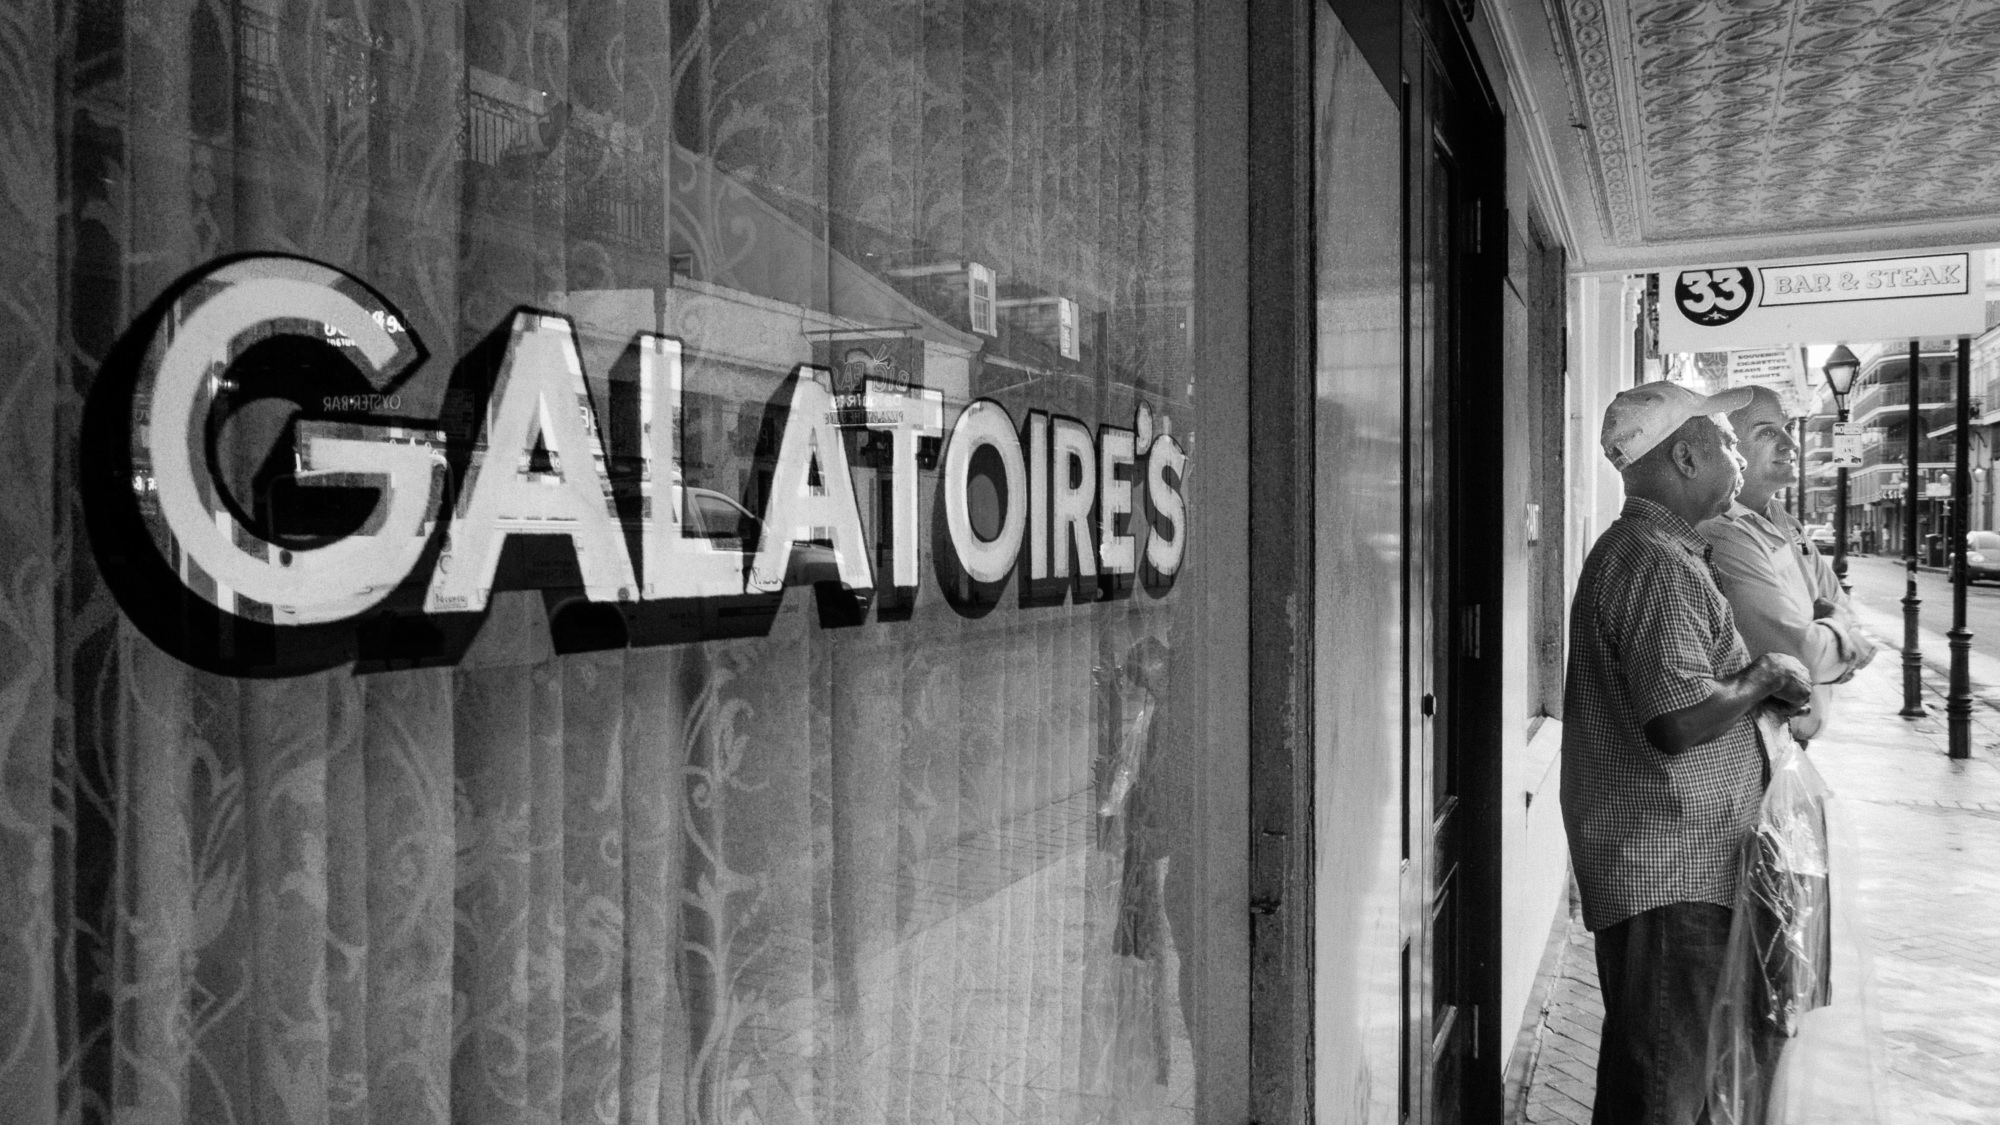 "Friday lunch at Galatoire’s is ritual and reunion." // Photo: Erik Pronske / Getty Images